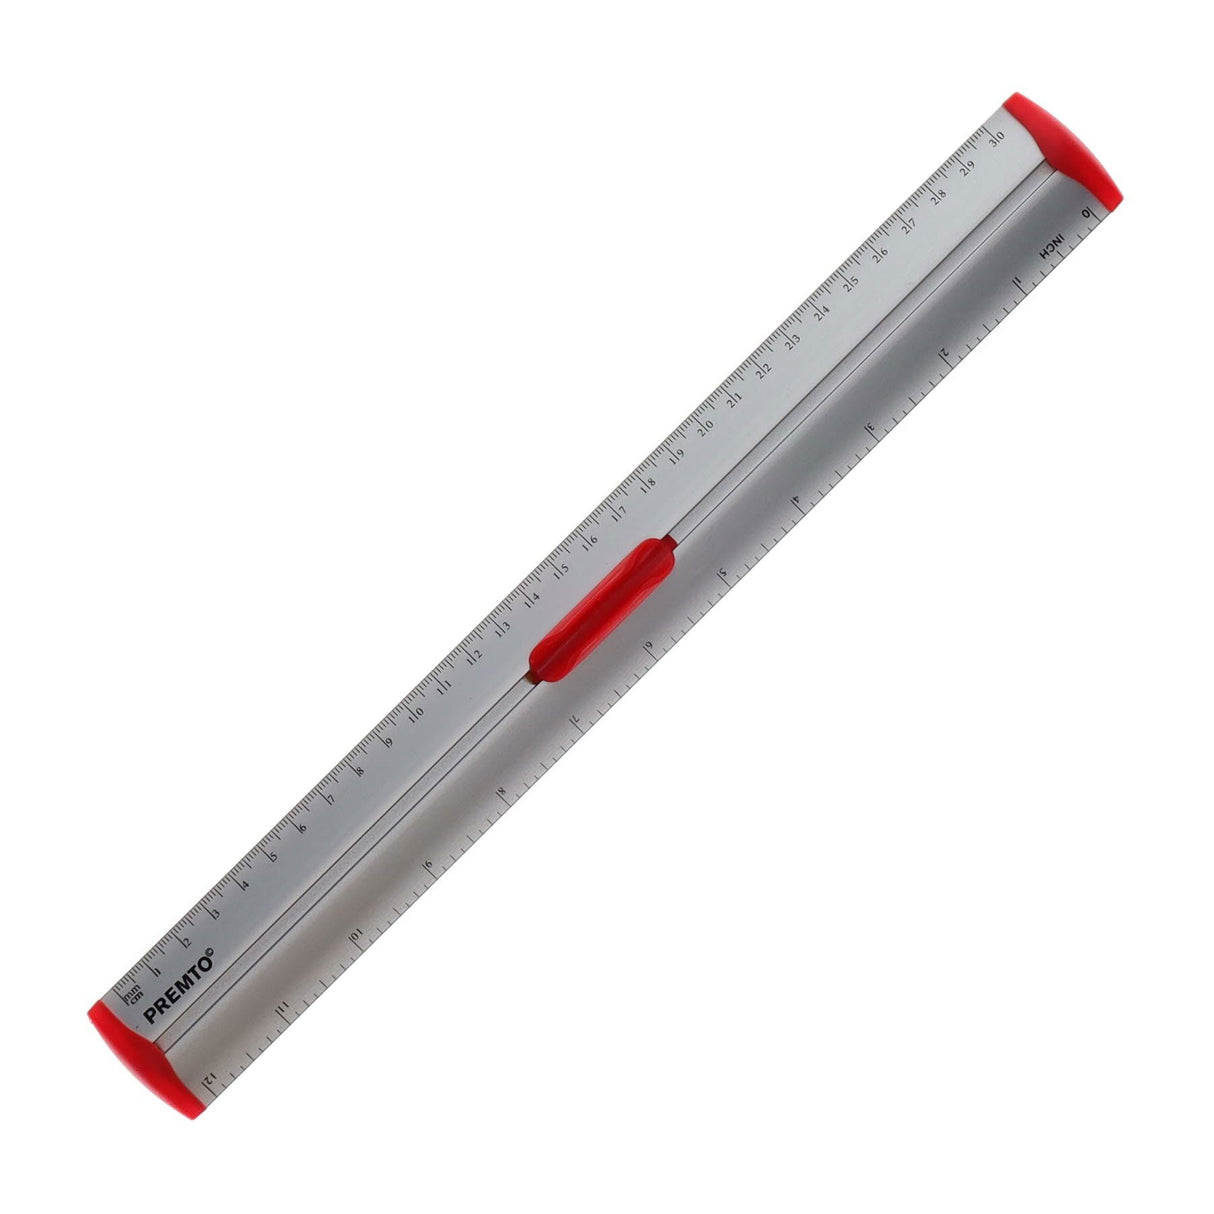 Premto S1 Aluminum Ruler With Grip 30cm - Ketchup Red-Rulers-Premto | Buy Online at Stationery Shop